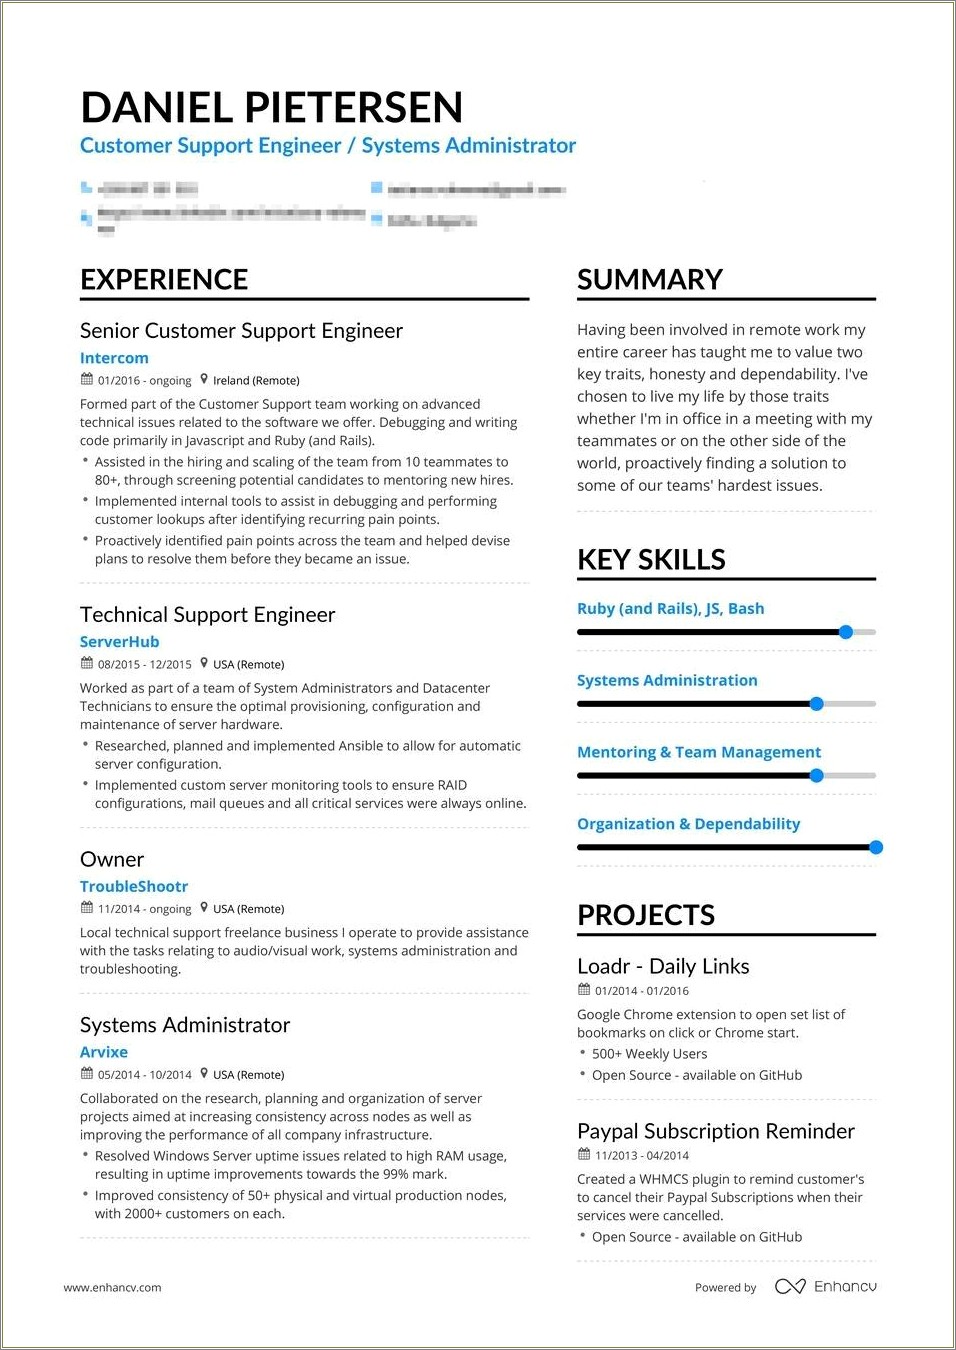 Resume For Someone With No Experience Reddit